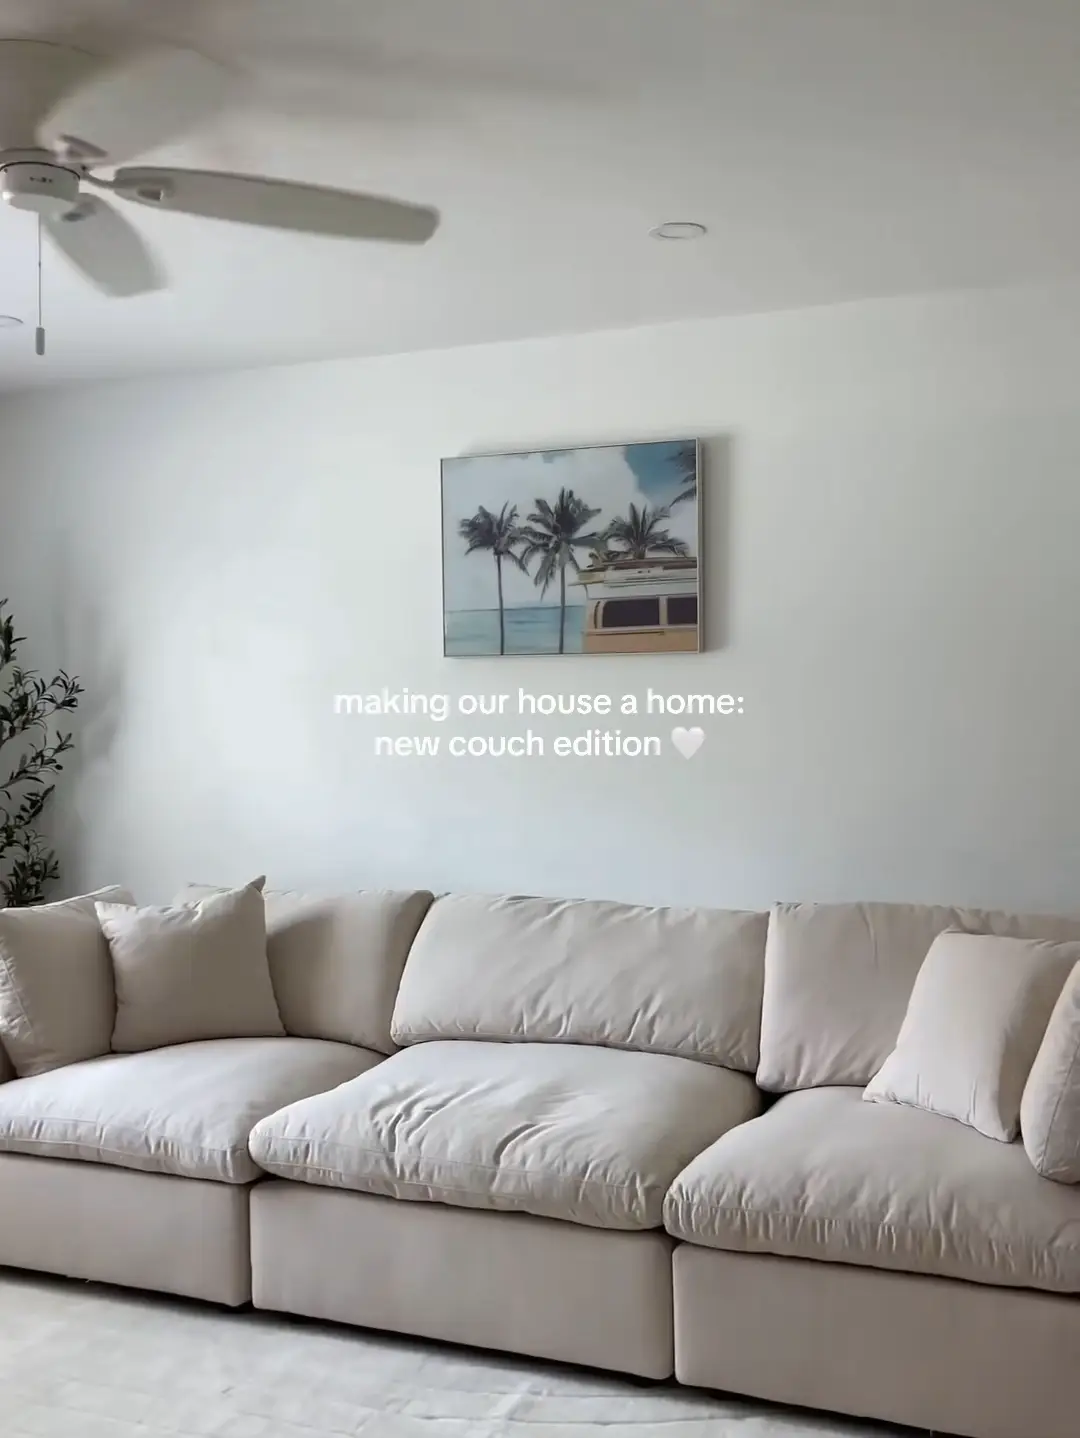 Best budget couch you’ll ever found | Video published by HouseofJones ...